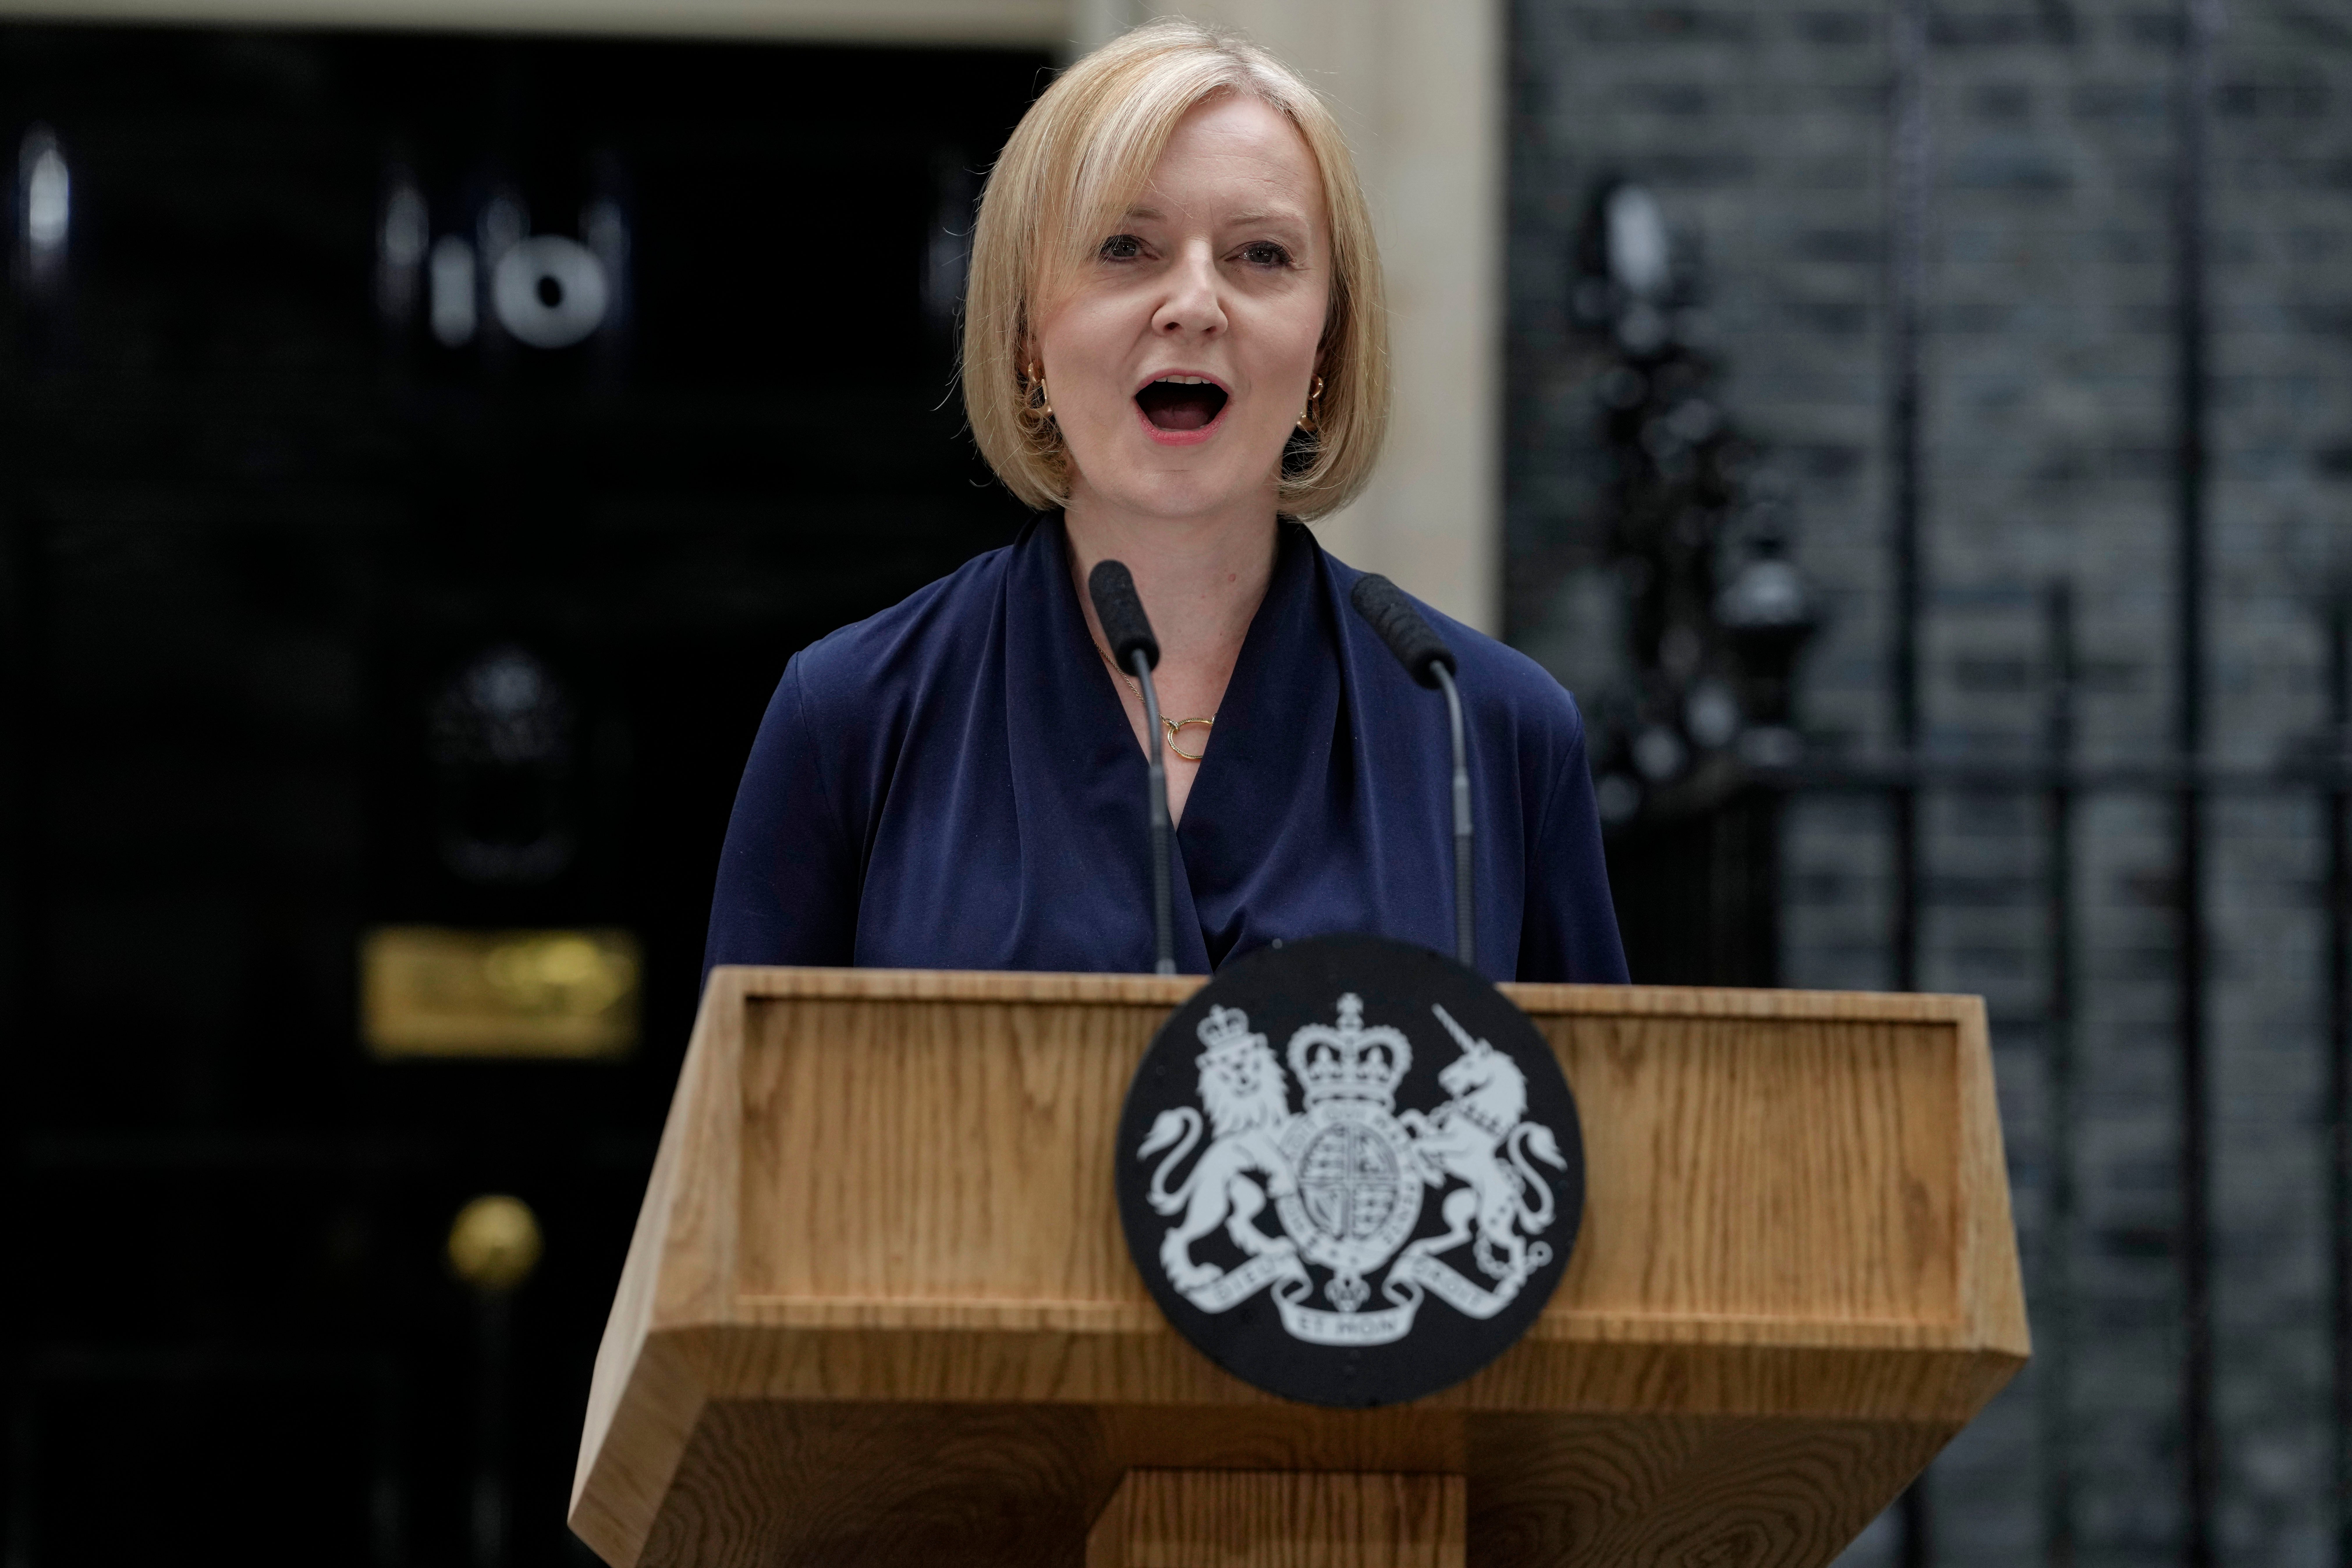 In happier times: Liz Truss on the day she became prime minister, three weeks ago